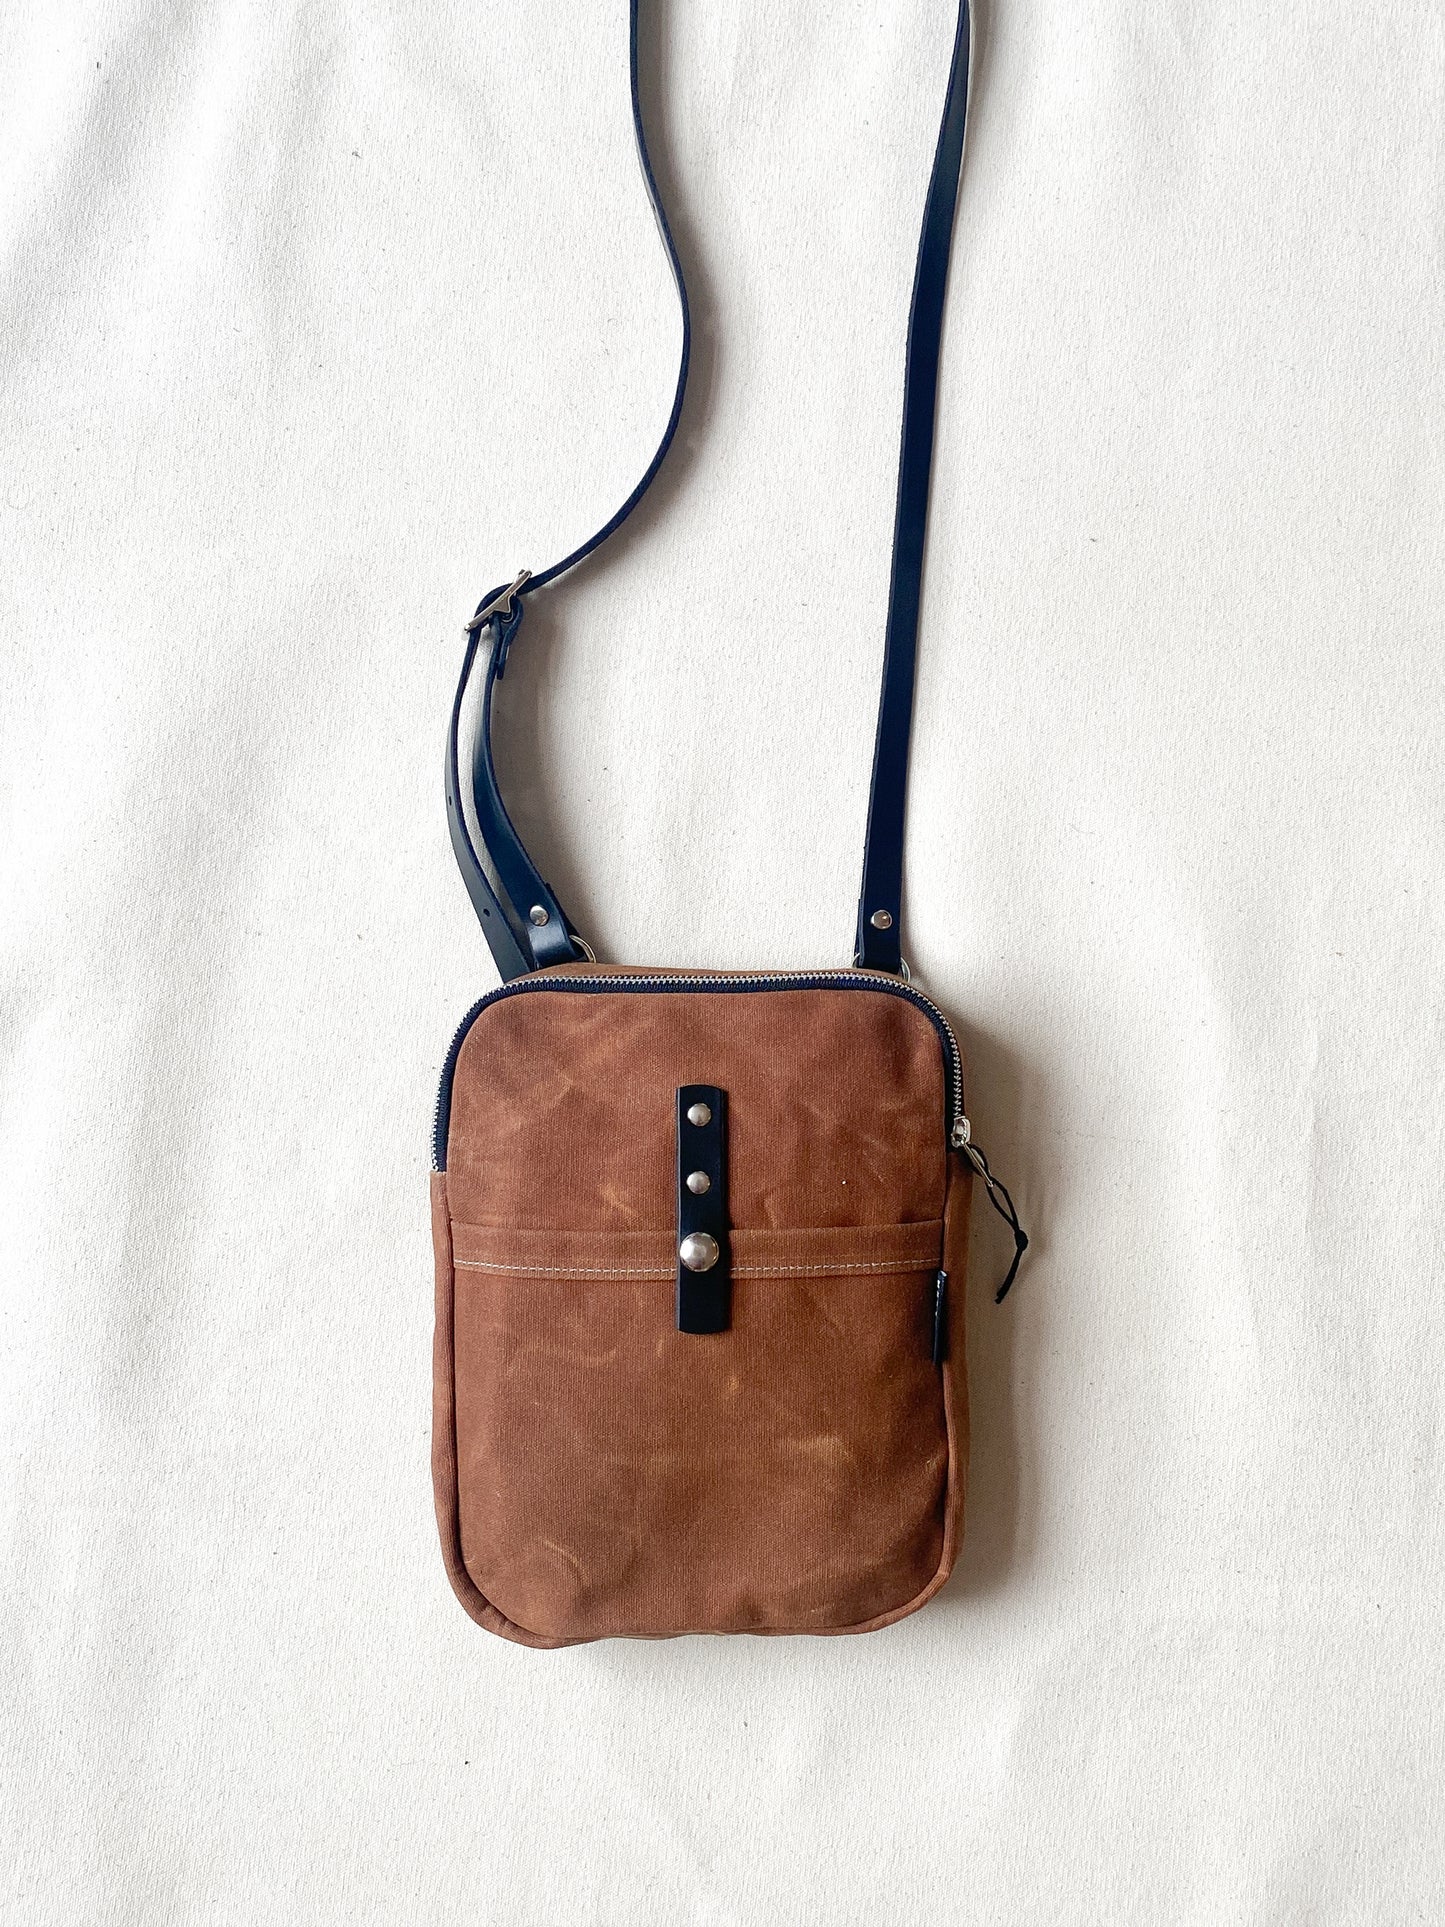 Brush  Canvas Messenger in brown. 